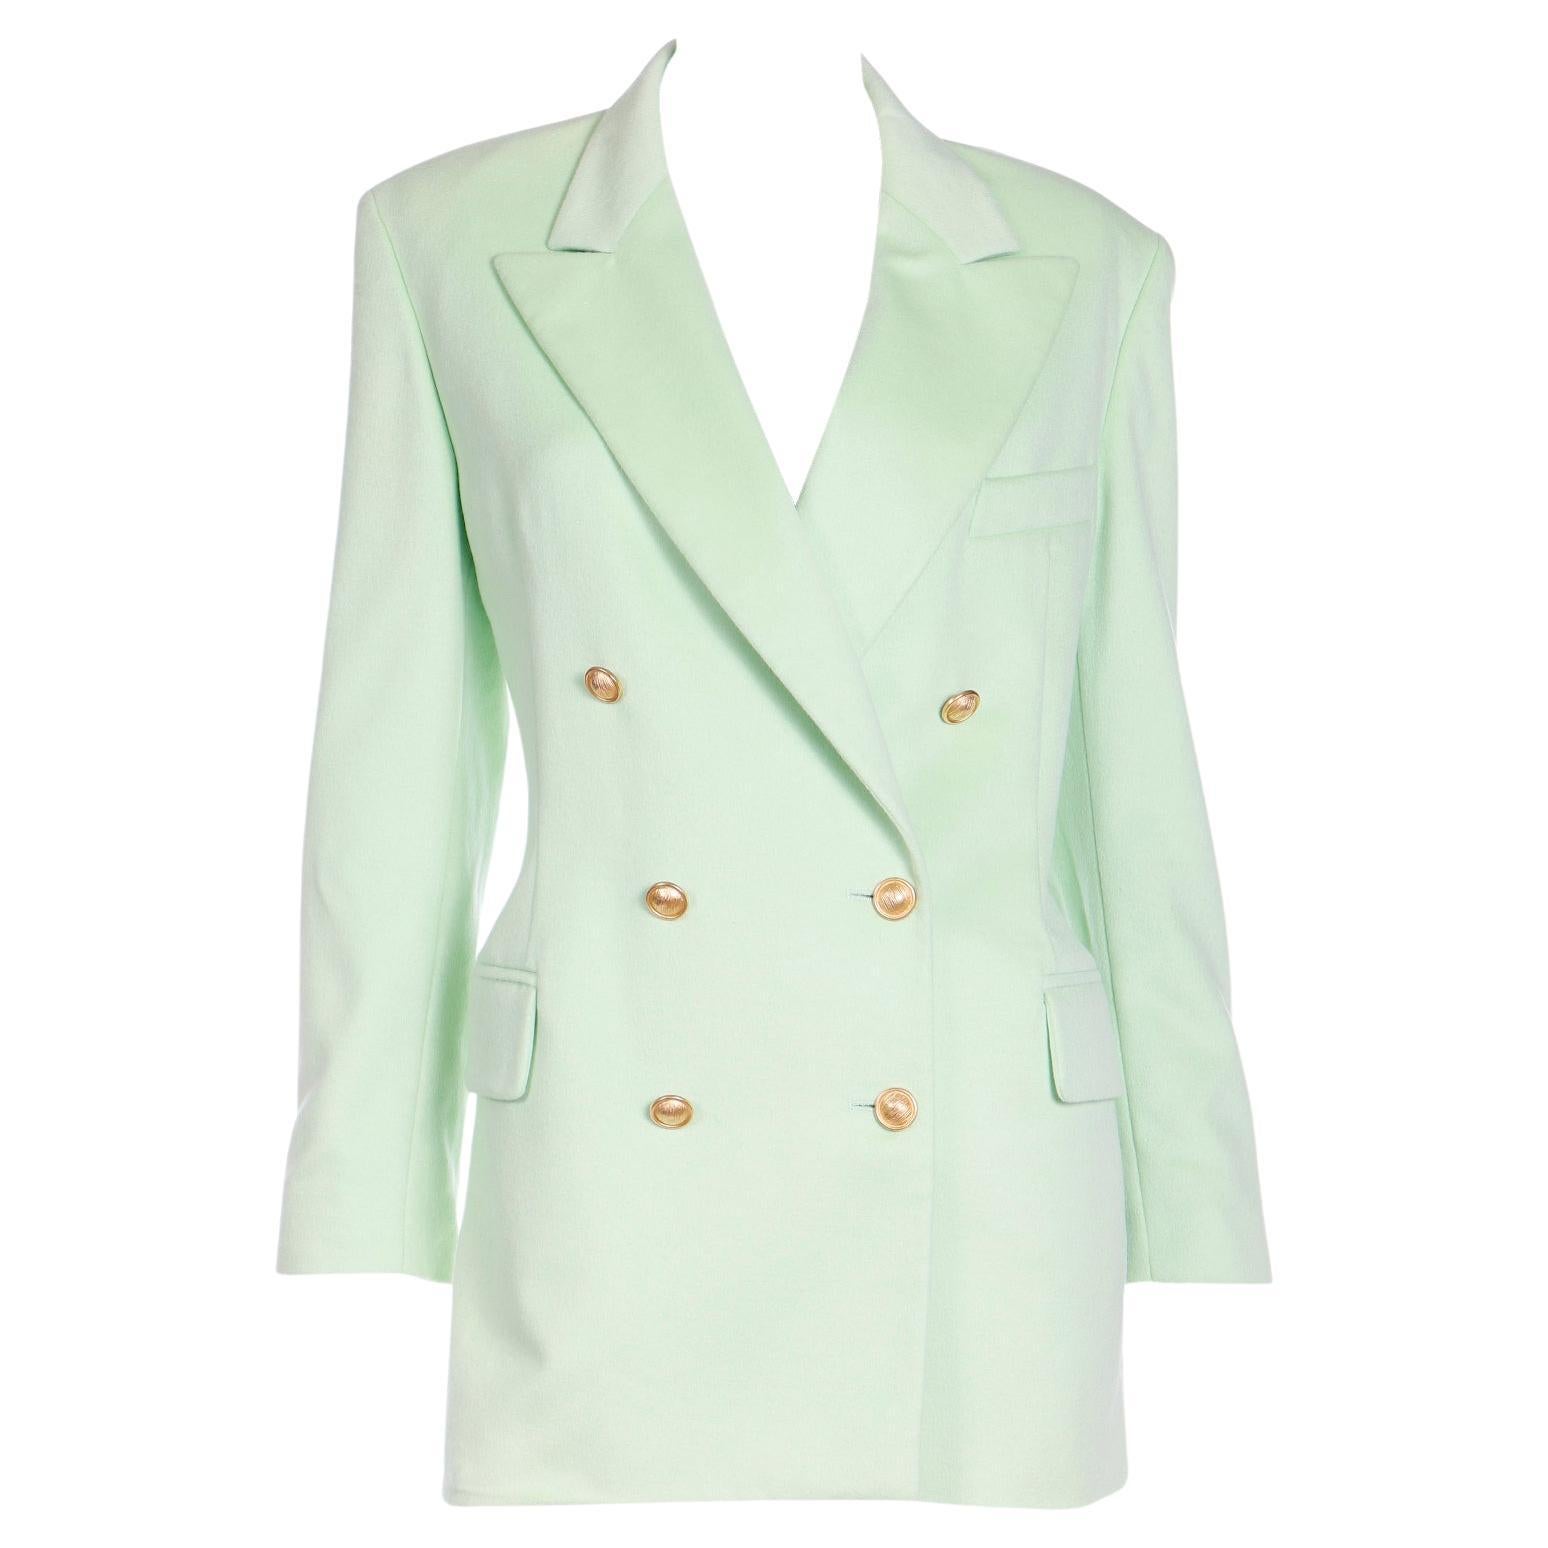 Margaretha Ley Escada Mint Green Cashmere Blend Double Breasted Blazer Jacket For Sale